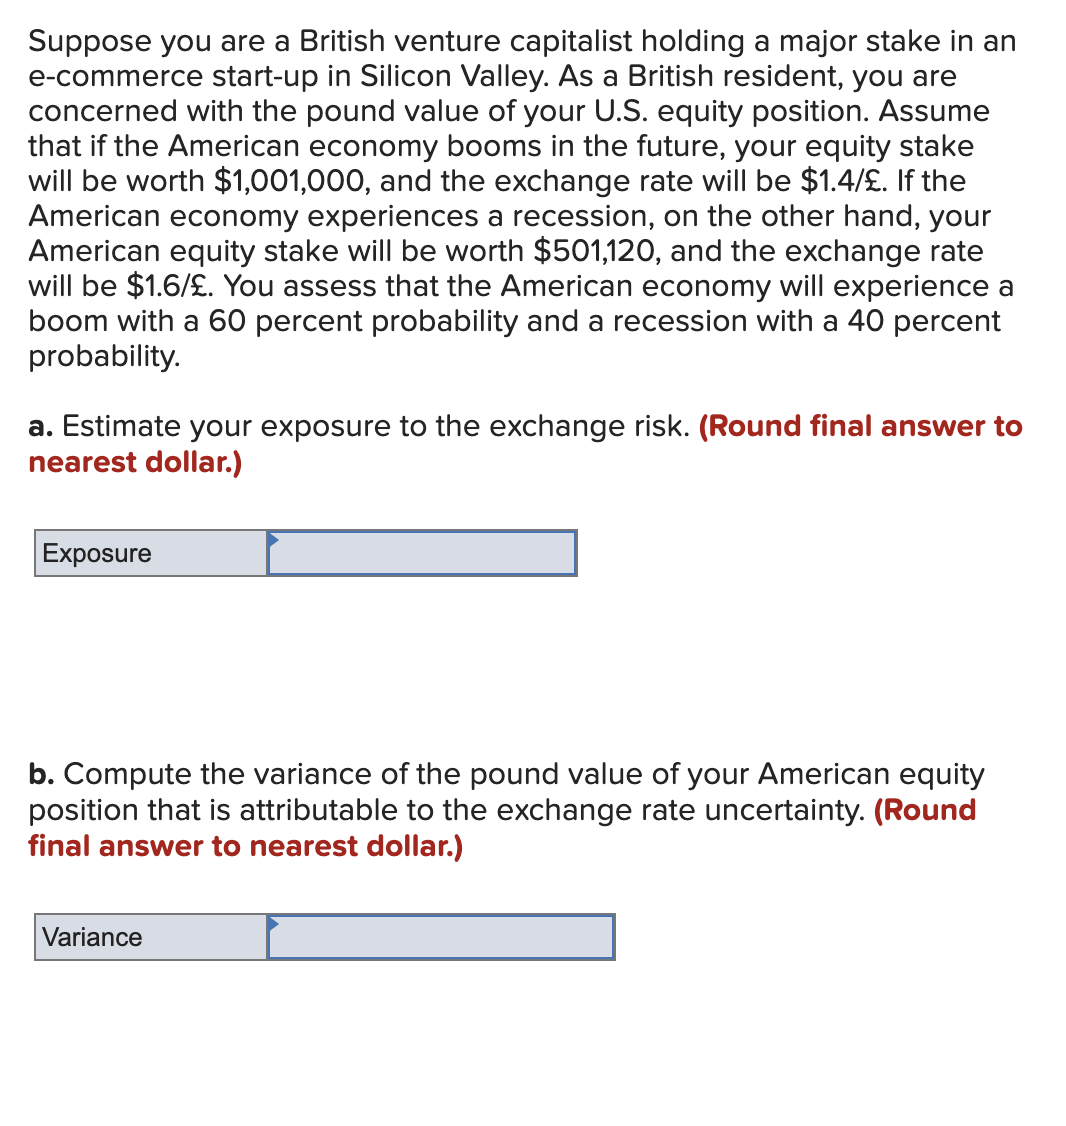 Suppose you are a British venture capitalist holding a major stake in an
e-commerce start-up in Silicon Valley. As a British resident, you are
concerned with the pound value of your U.S. equity position. Assume
that if the American economy booms in the future, your equity stake
will be worth $1,001,000, and the exchange rate will be $1.4/£. If the
American economy experiences a recession, on the other hand, your
American equity stake will be worth $501,120, and the exchange rate
will be $1.6/£. You assess that the American economy will experience a
boom with a 60 percent probability and a recession with a 40 percent
probability.
a. Estimate your exposure to the exchange risk. (Round final answer to
nearest dollar.)
Exposure
b. Compute the variance of the pound value of your American equity
position that is attributable to the exchange rate uncertainty. (Round
final answer to nearest dollar.)
Variance